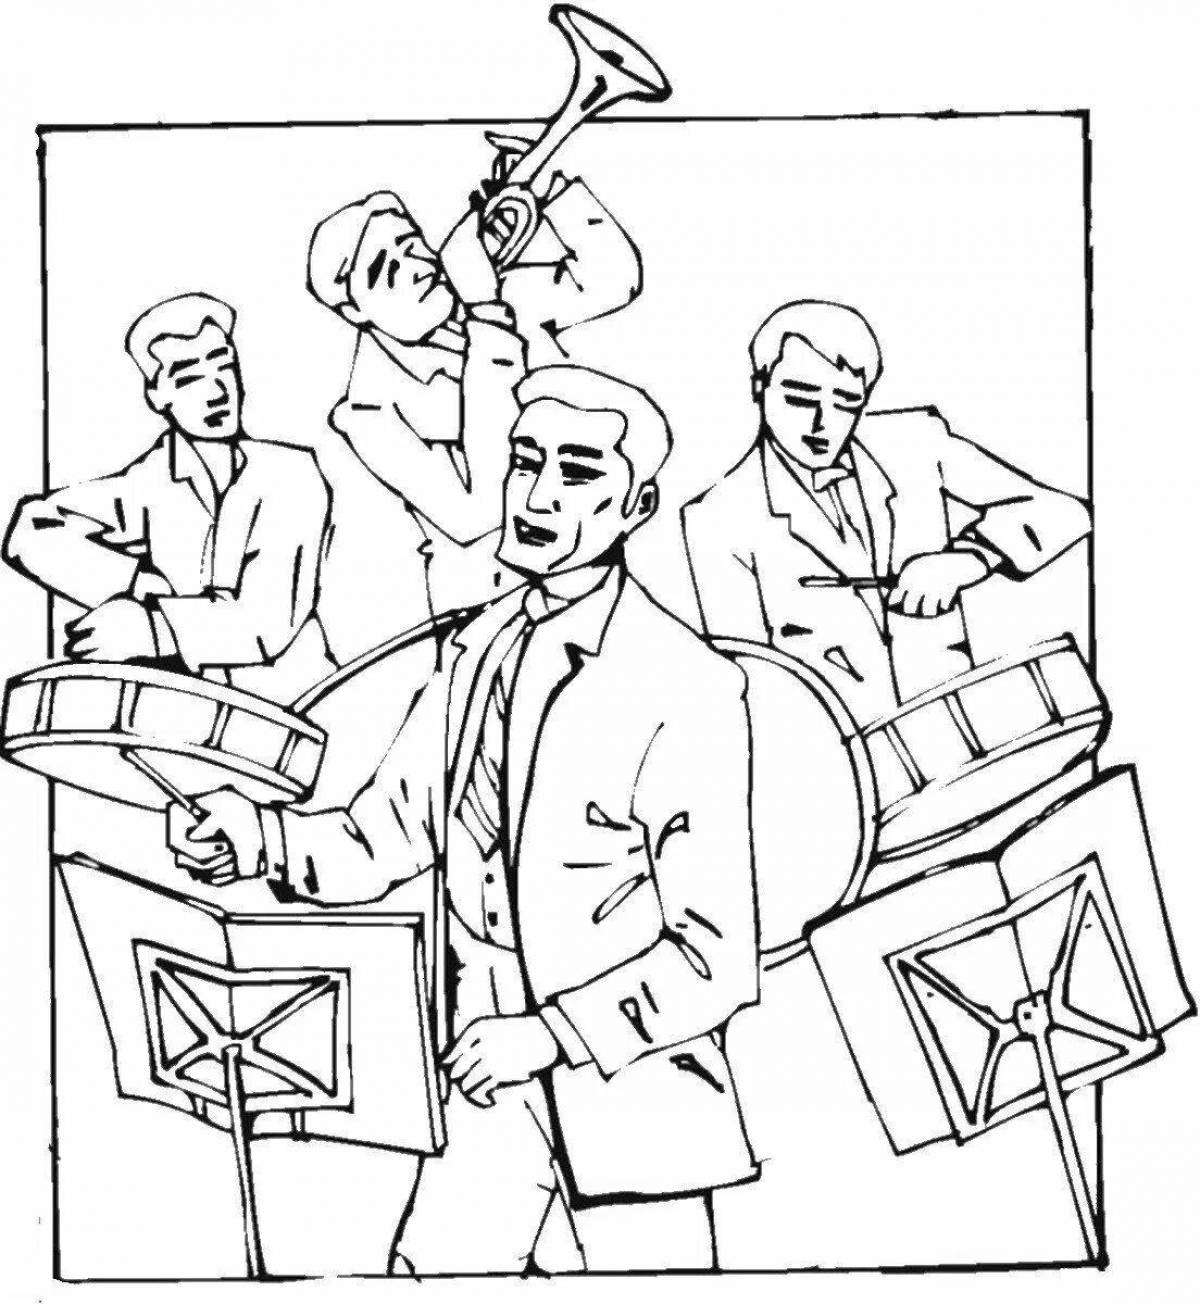 Coloring book great conductor